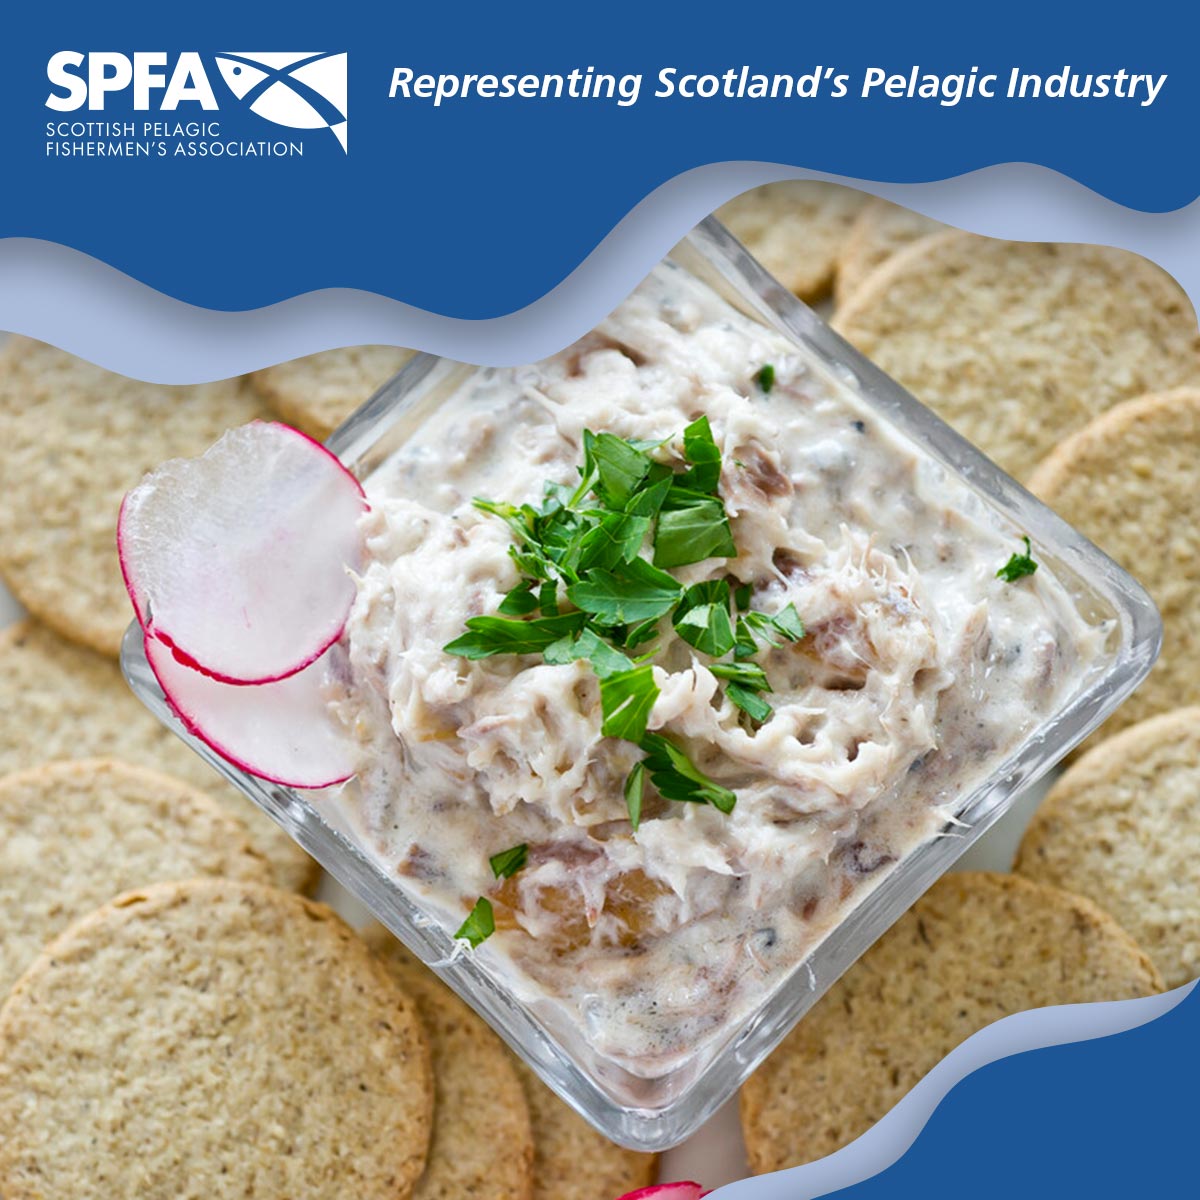 Recipe of the week - sOatcakes topped with Mackerel Pâté #LoveSeafood

bit.ly/3R8NfBg